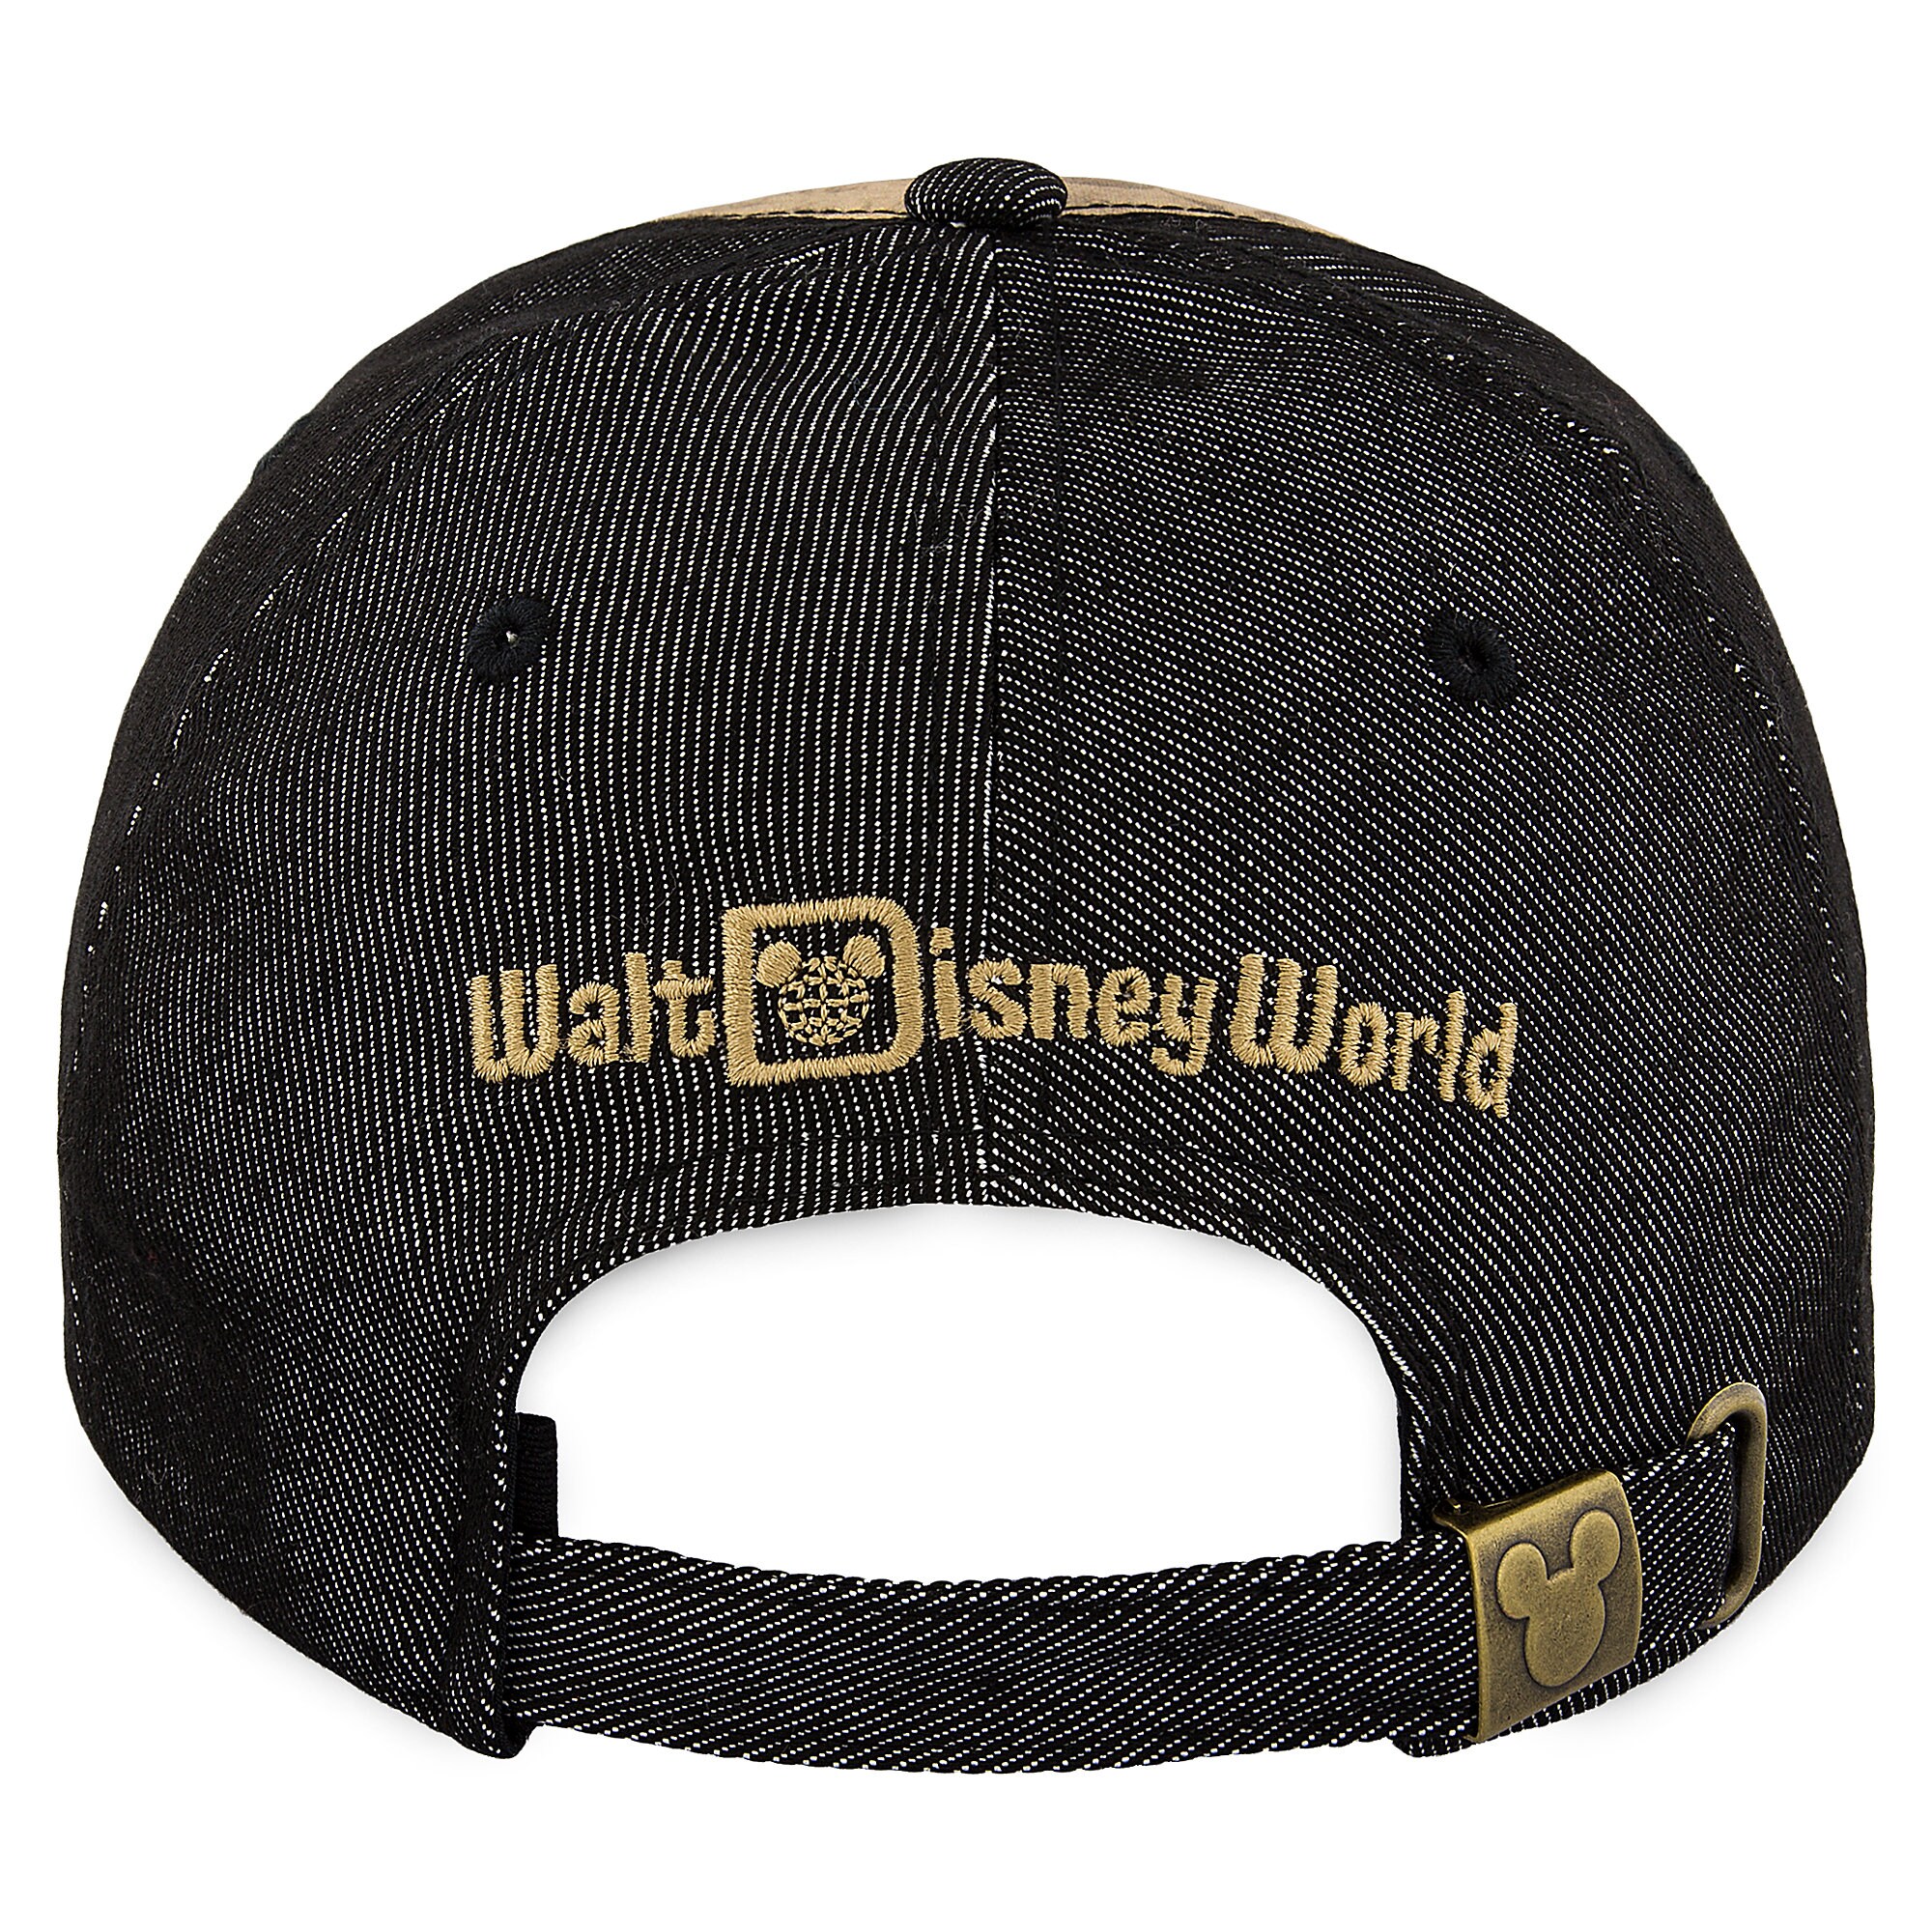 Mickey Mouse Steamboat Willie Baseball Cap for Adults - Walt Disney World